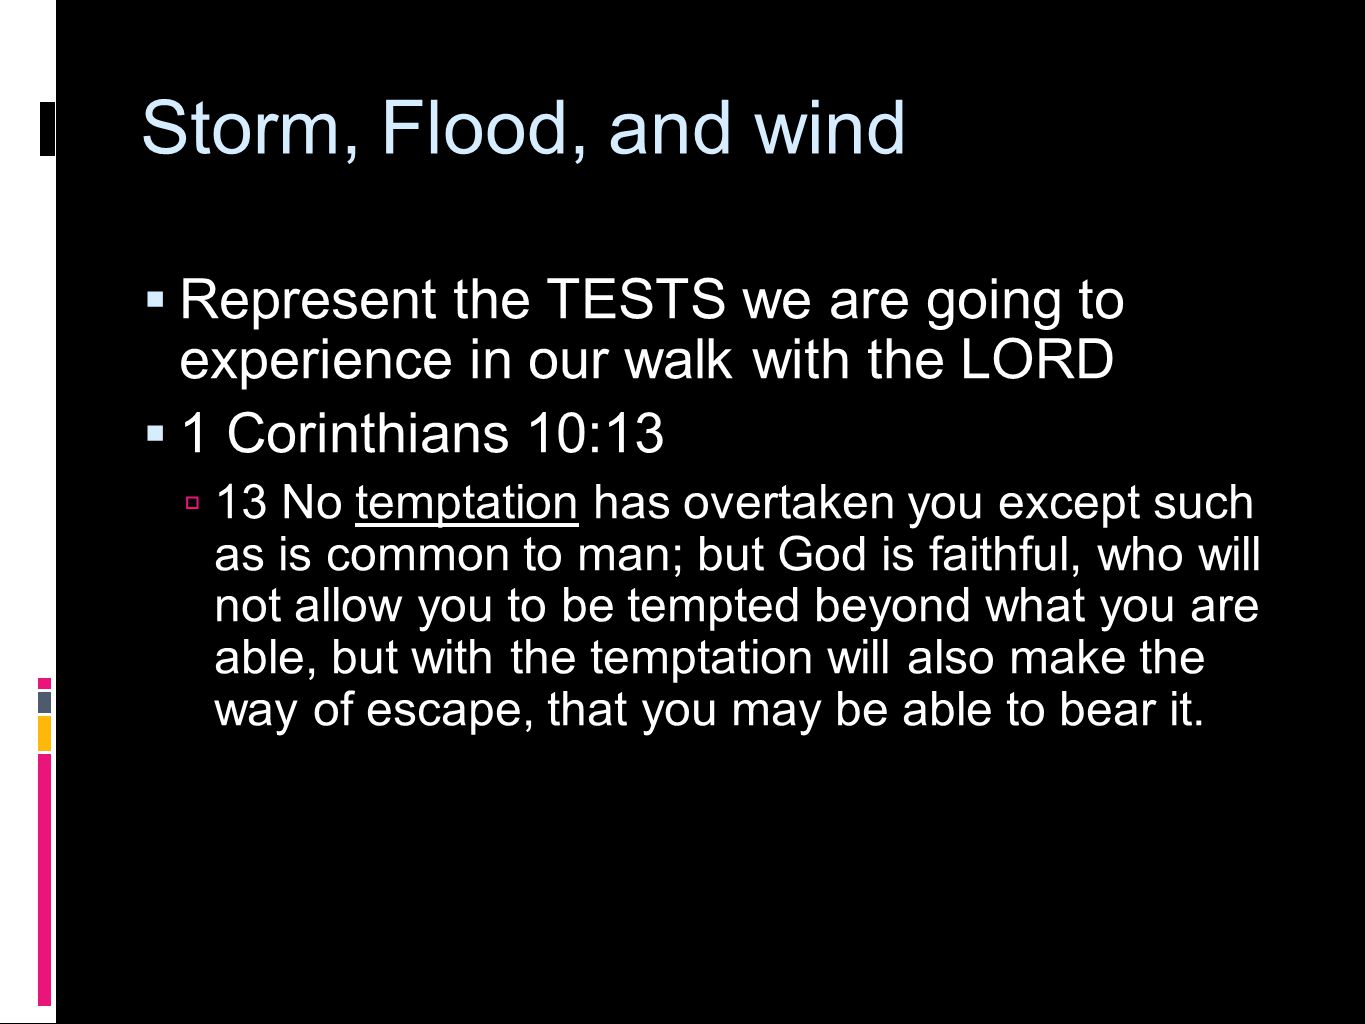 Storm, Flood, and wind  Represent the TESTS we are going to experience in our walk with the LORD  1 Corinthians 10:13  13 No temptation has overtaken you except such as is common to man; but God is faithful, who will not allow you to be tempted beyond what you are able, but with the temptation will also make the way of escape, that you may be able to bear it.